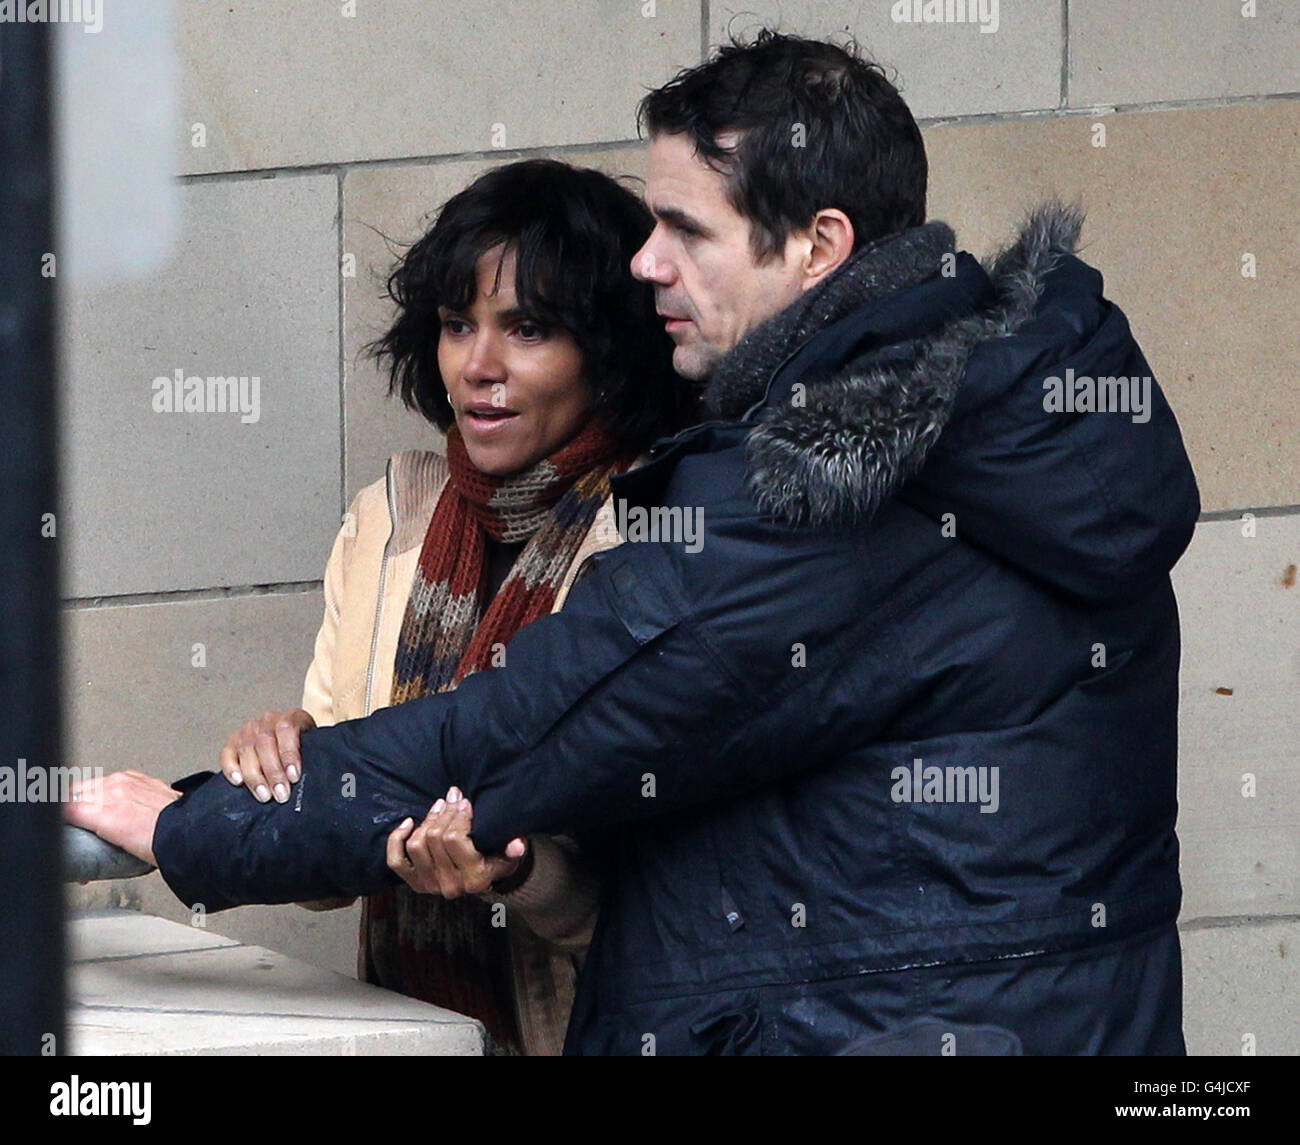 Halle Berry on the set of her new film Cloud Atlas which is currently being filmed in Glasgow in between takes with director Tom Tykwer. The film also stars Tom Hanks. Stock Photo